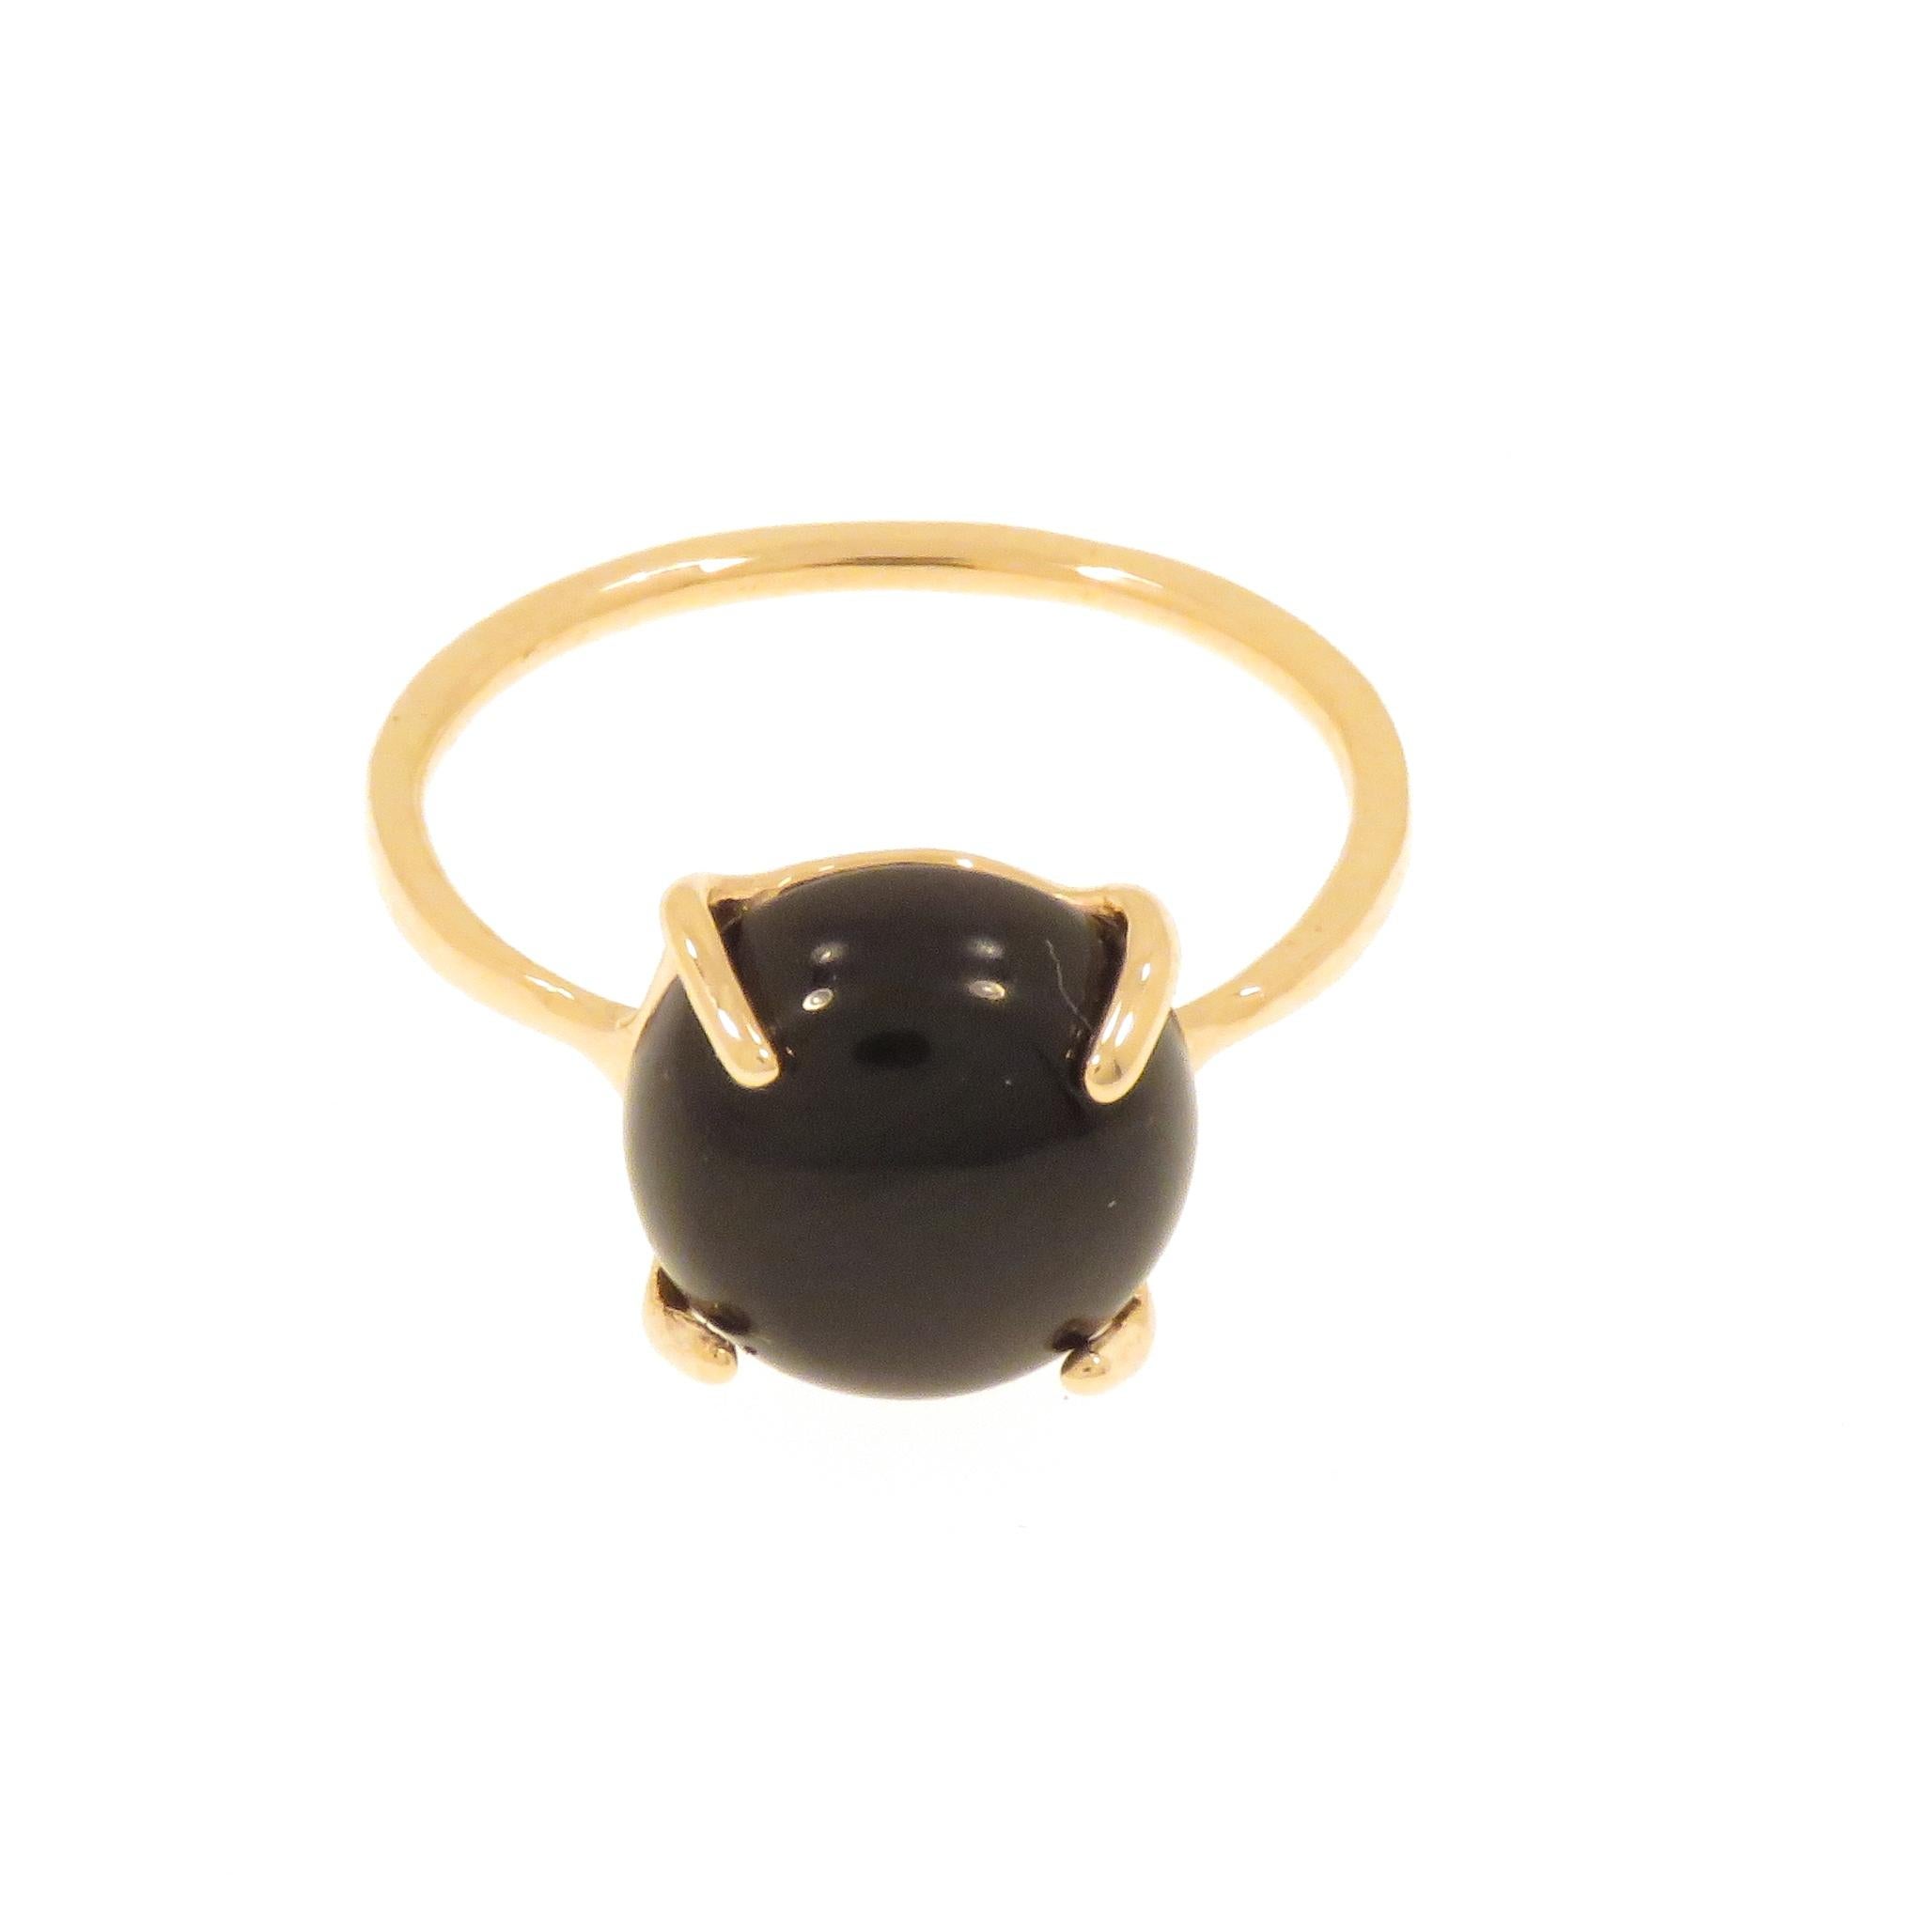 Cabochon cut onyx featured in a contemporary ring crafted in 9 karat rose gold. The size of the gemstone is 10x10 mm / 0.393x0.393 inches. US finger size is 6 , French size 52, Italian size 12, resizable to the customer's size before shipment. The